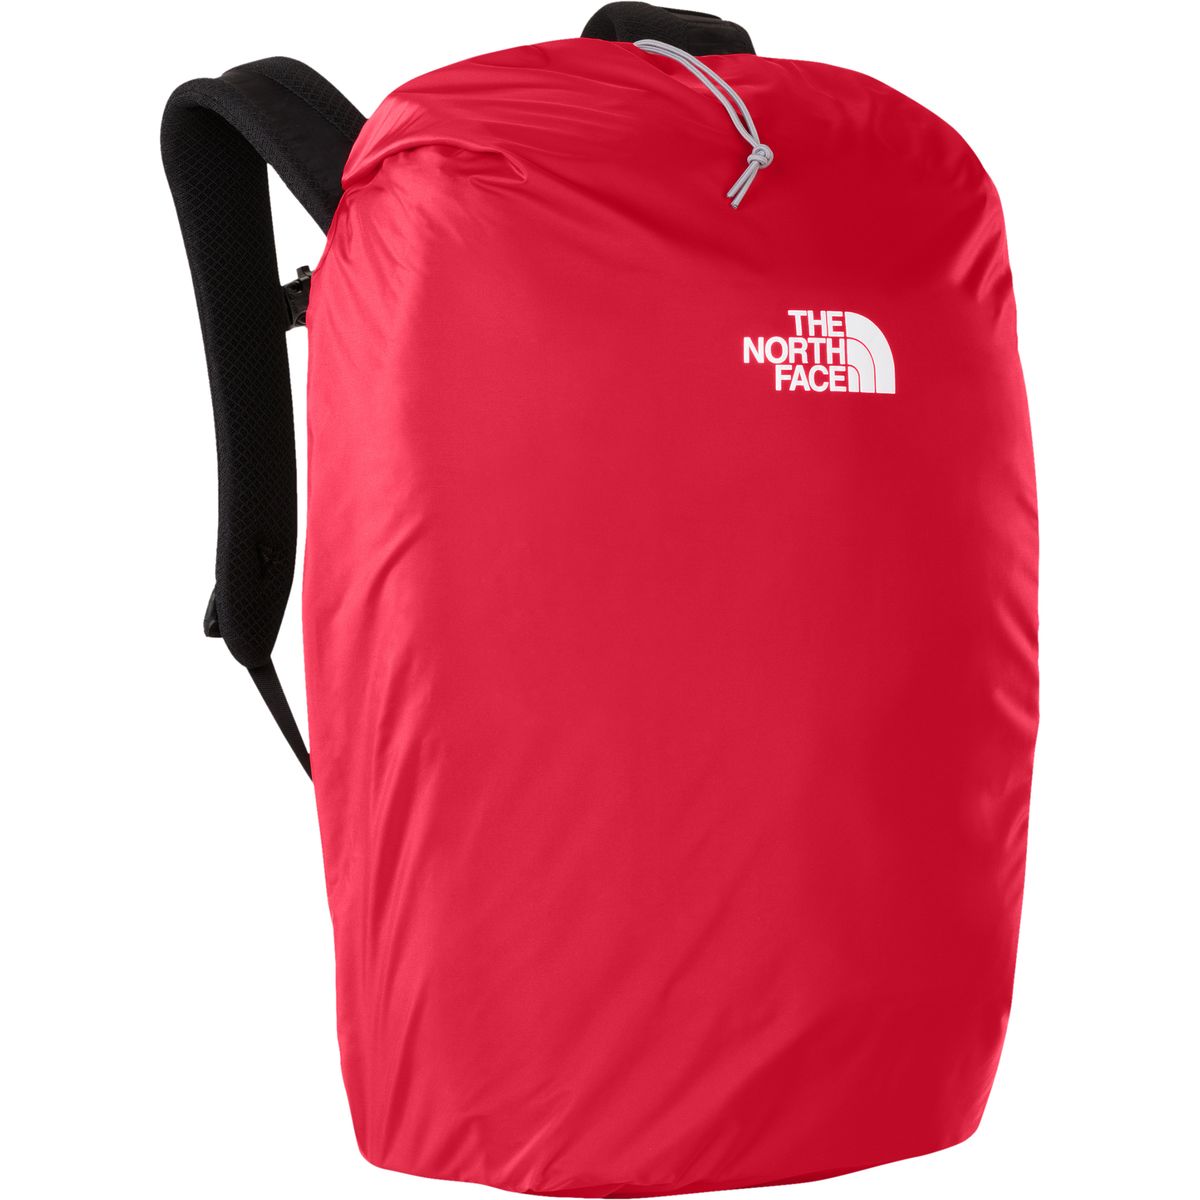 The North Face Backpack Rain Cover 